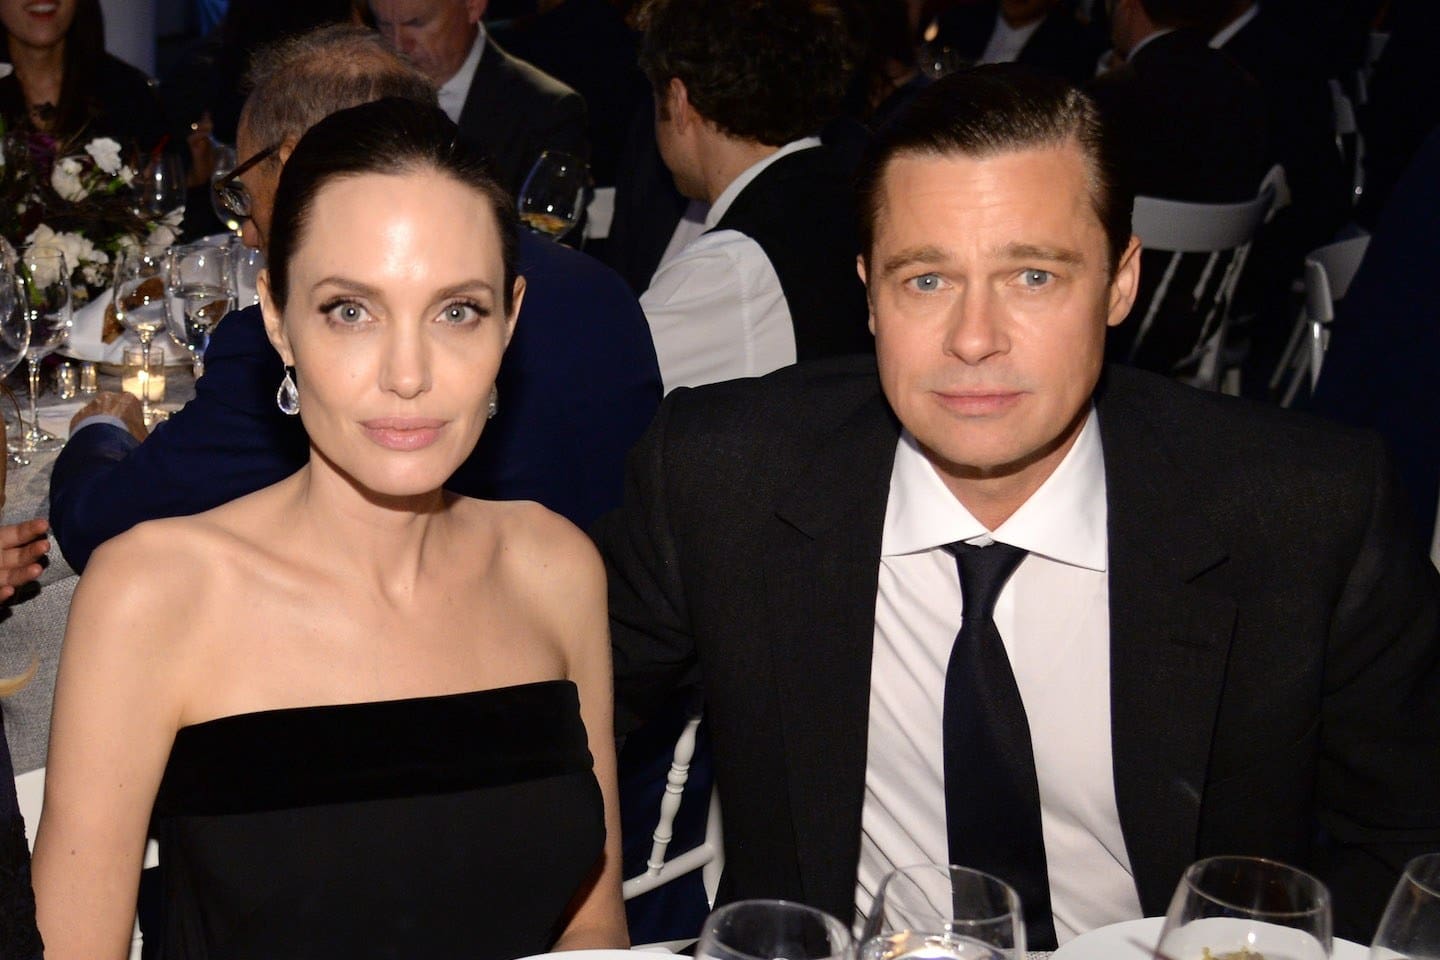 ”brad-pitt-and-angelina-jolie-photographed-together-in-public-for-the-first-time-since-their-split-details”